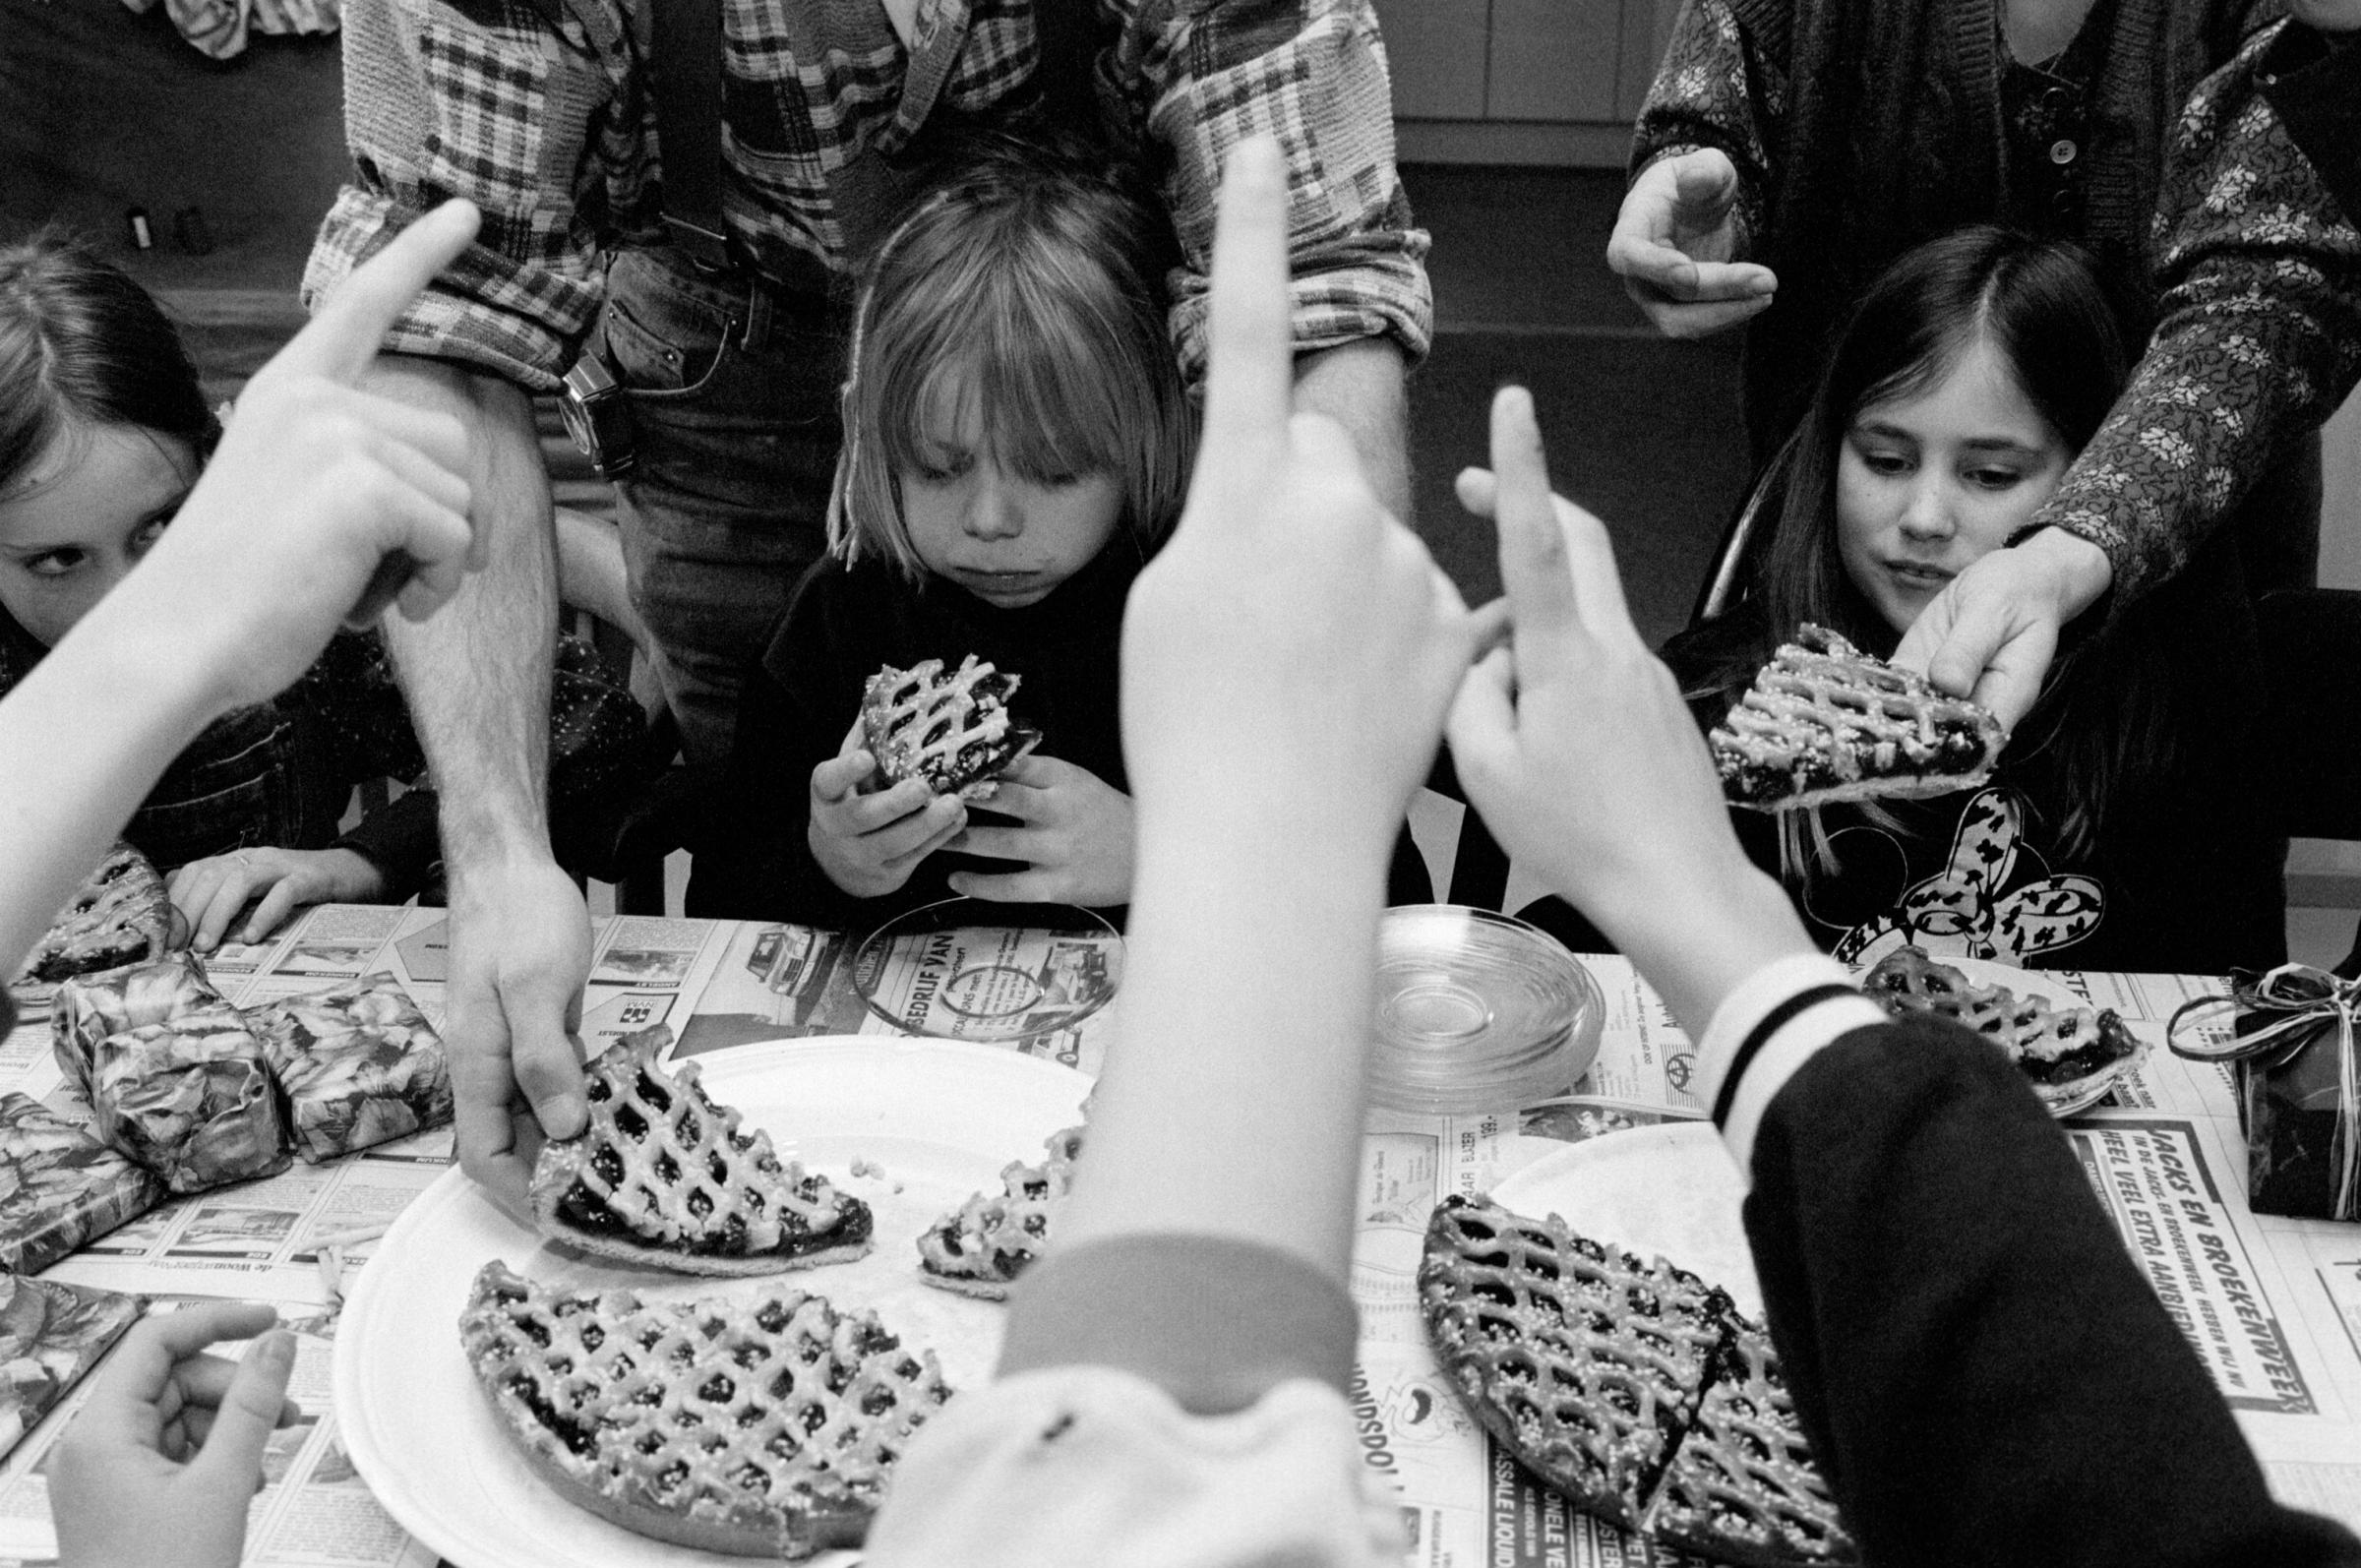 Happy Birthday! Dutch Children’s Parties - Children eat cherry pie at the party of a nine year old...